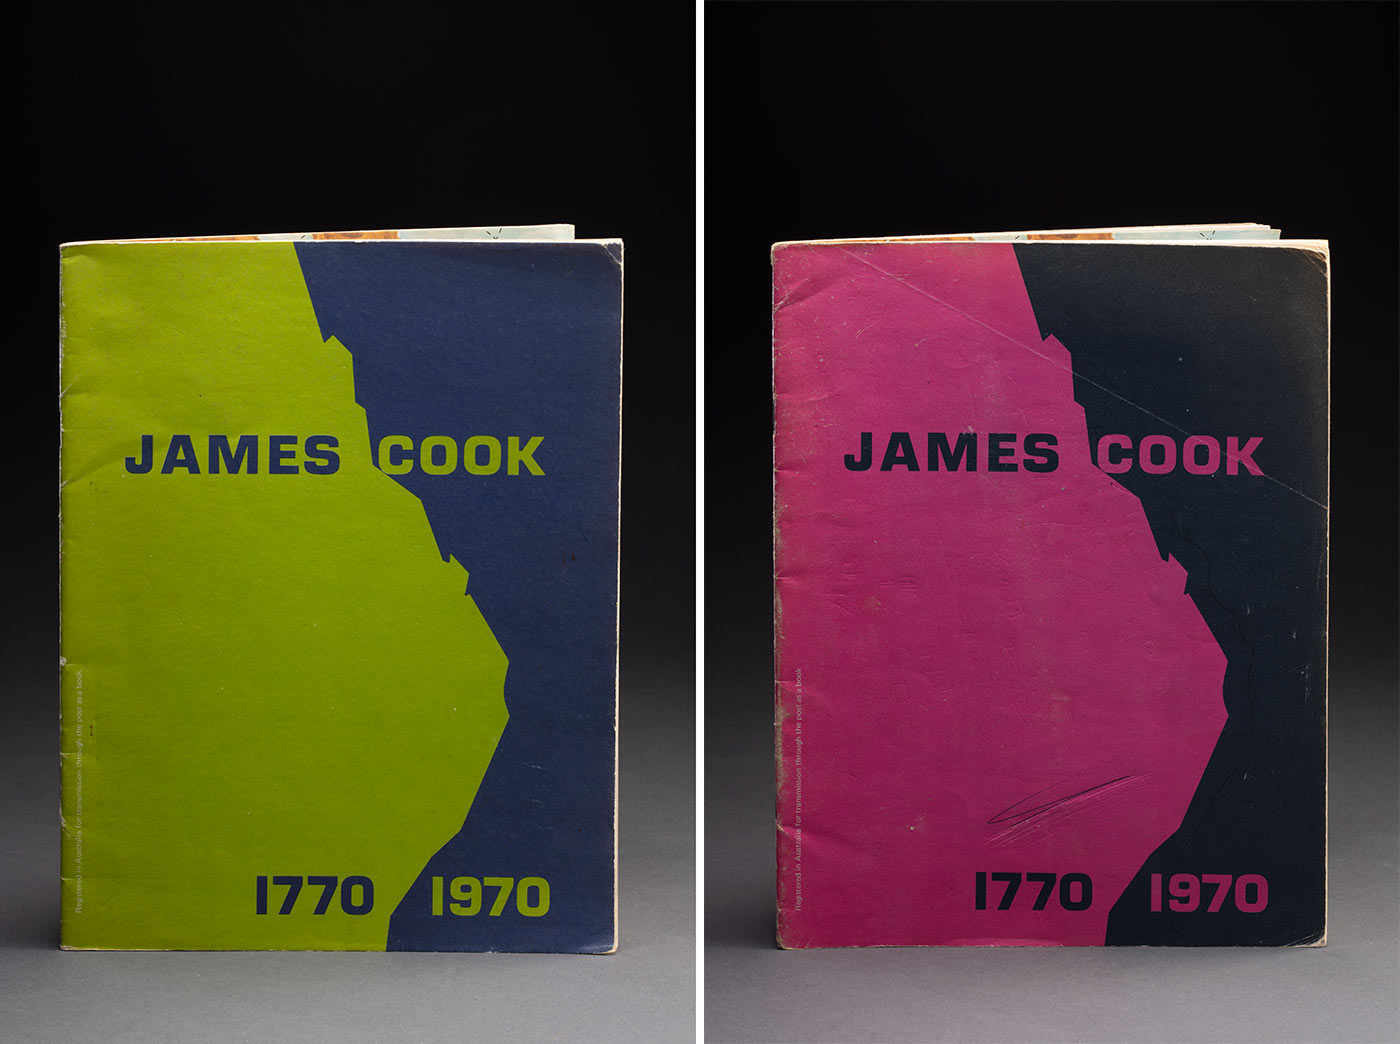 Image composite featuring on the left a booklet with a pink and dark grey cardboard cover and on the right is a booklet with a lime green and dark blue cardboard cover. Text on both covers reads 'JAMES COOK / 1770 1970'. - click to view larger image